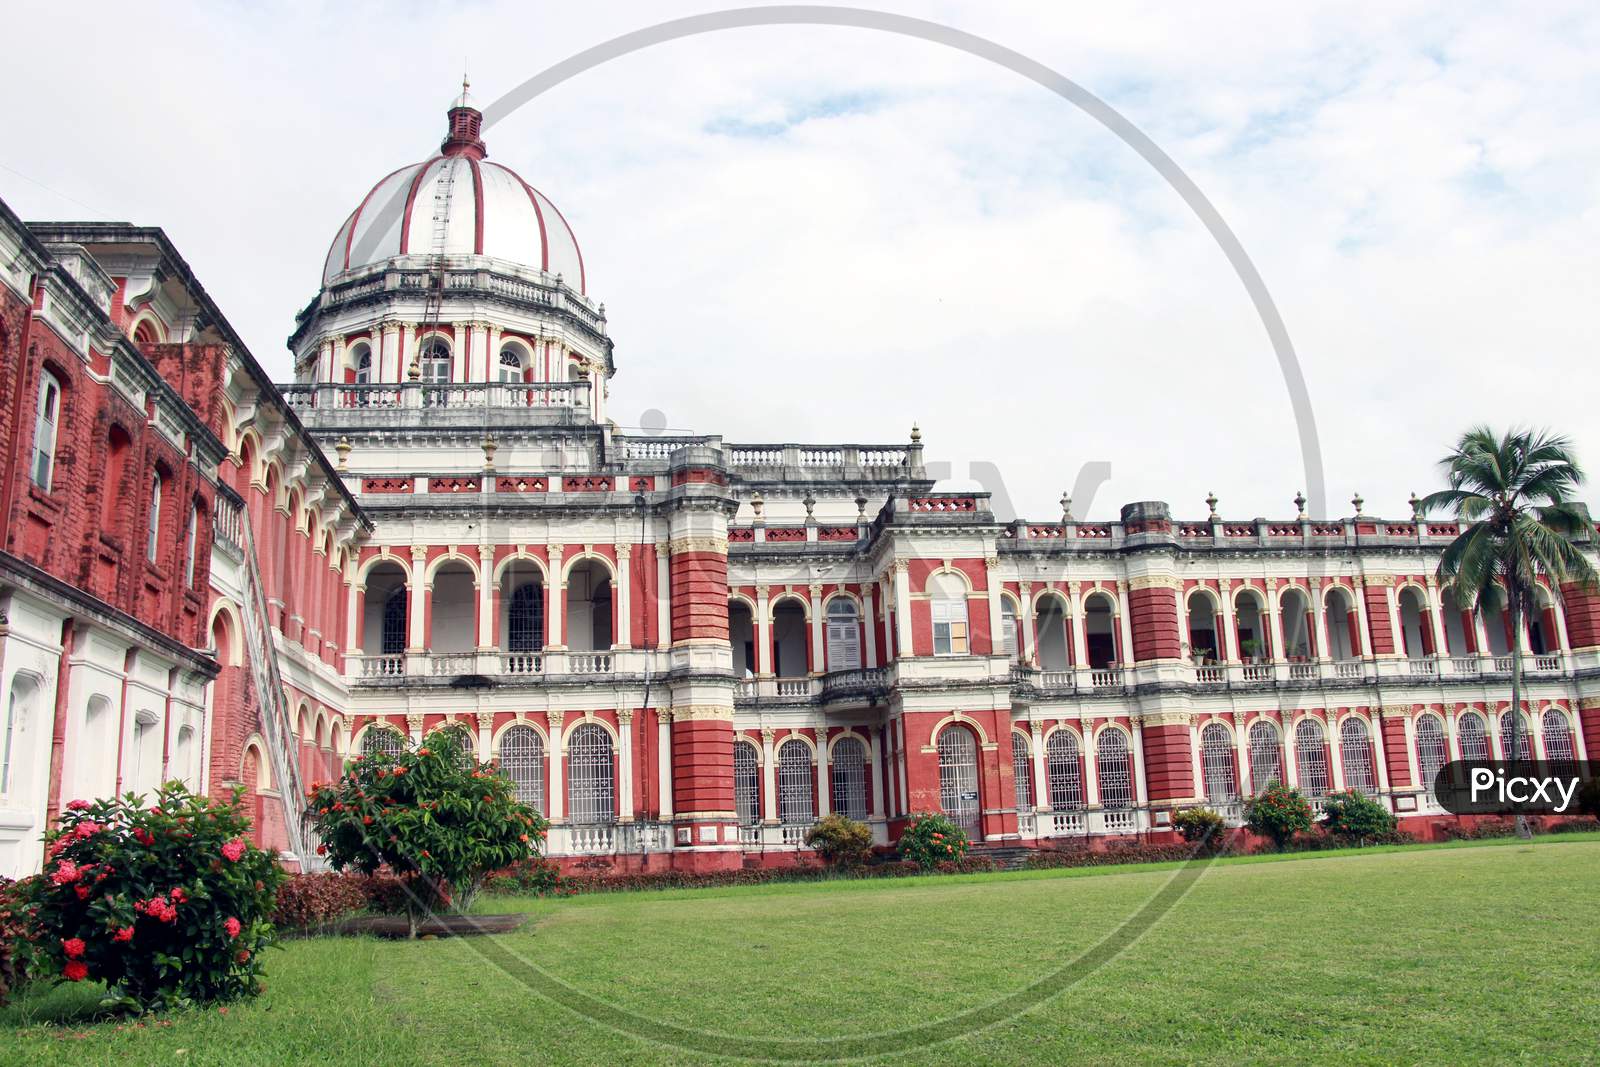 Cooch Behar Palace, also called the Victor Jubilee Palace. Ancient architecture. Cooch Behar Rajbari